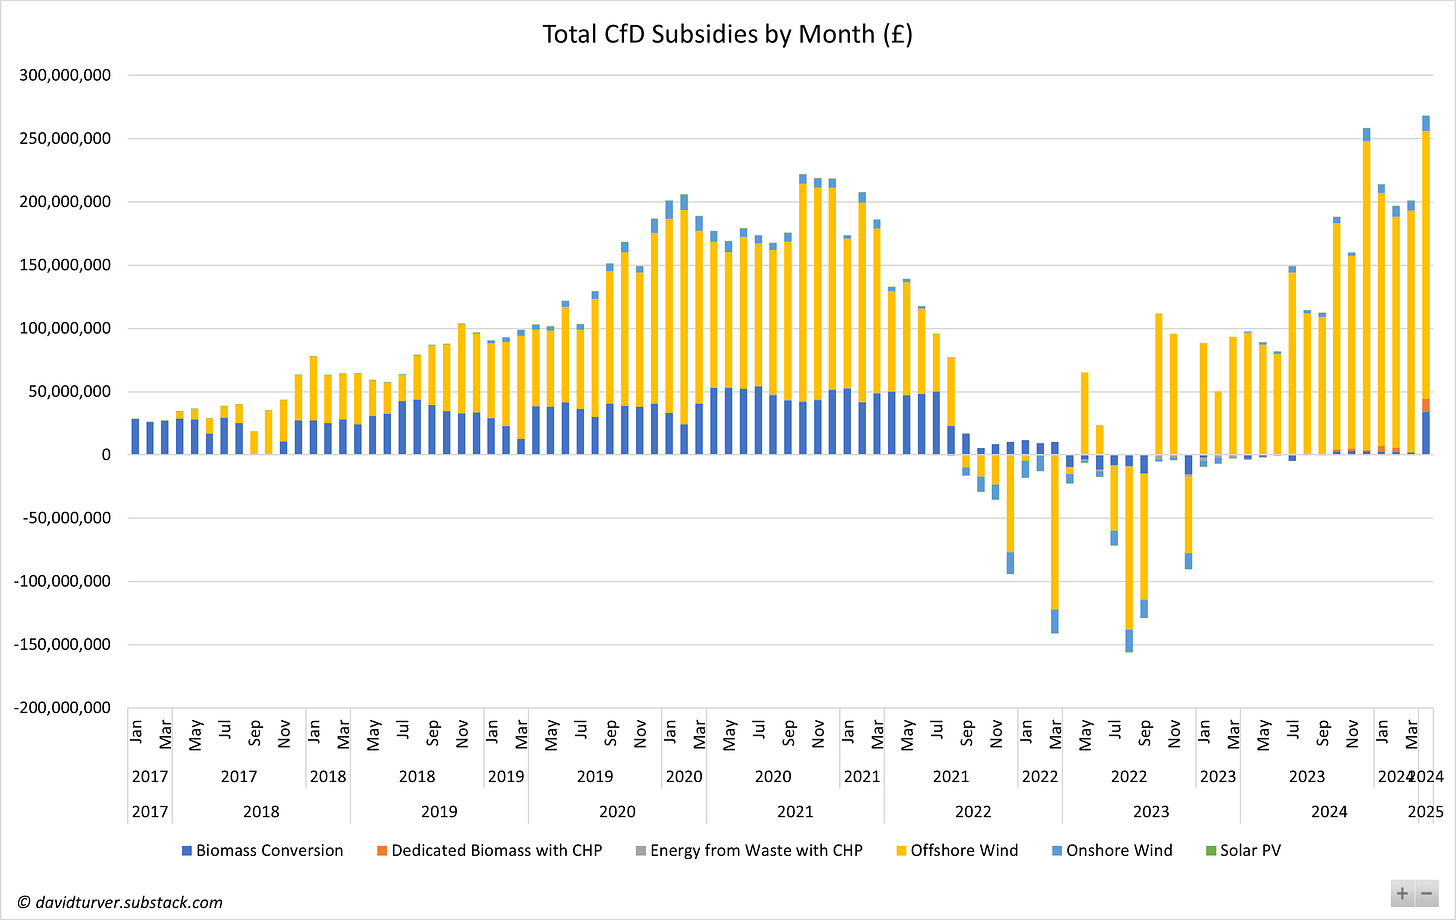 Figure B - Record Overall CfD Subsidies in April 2024